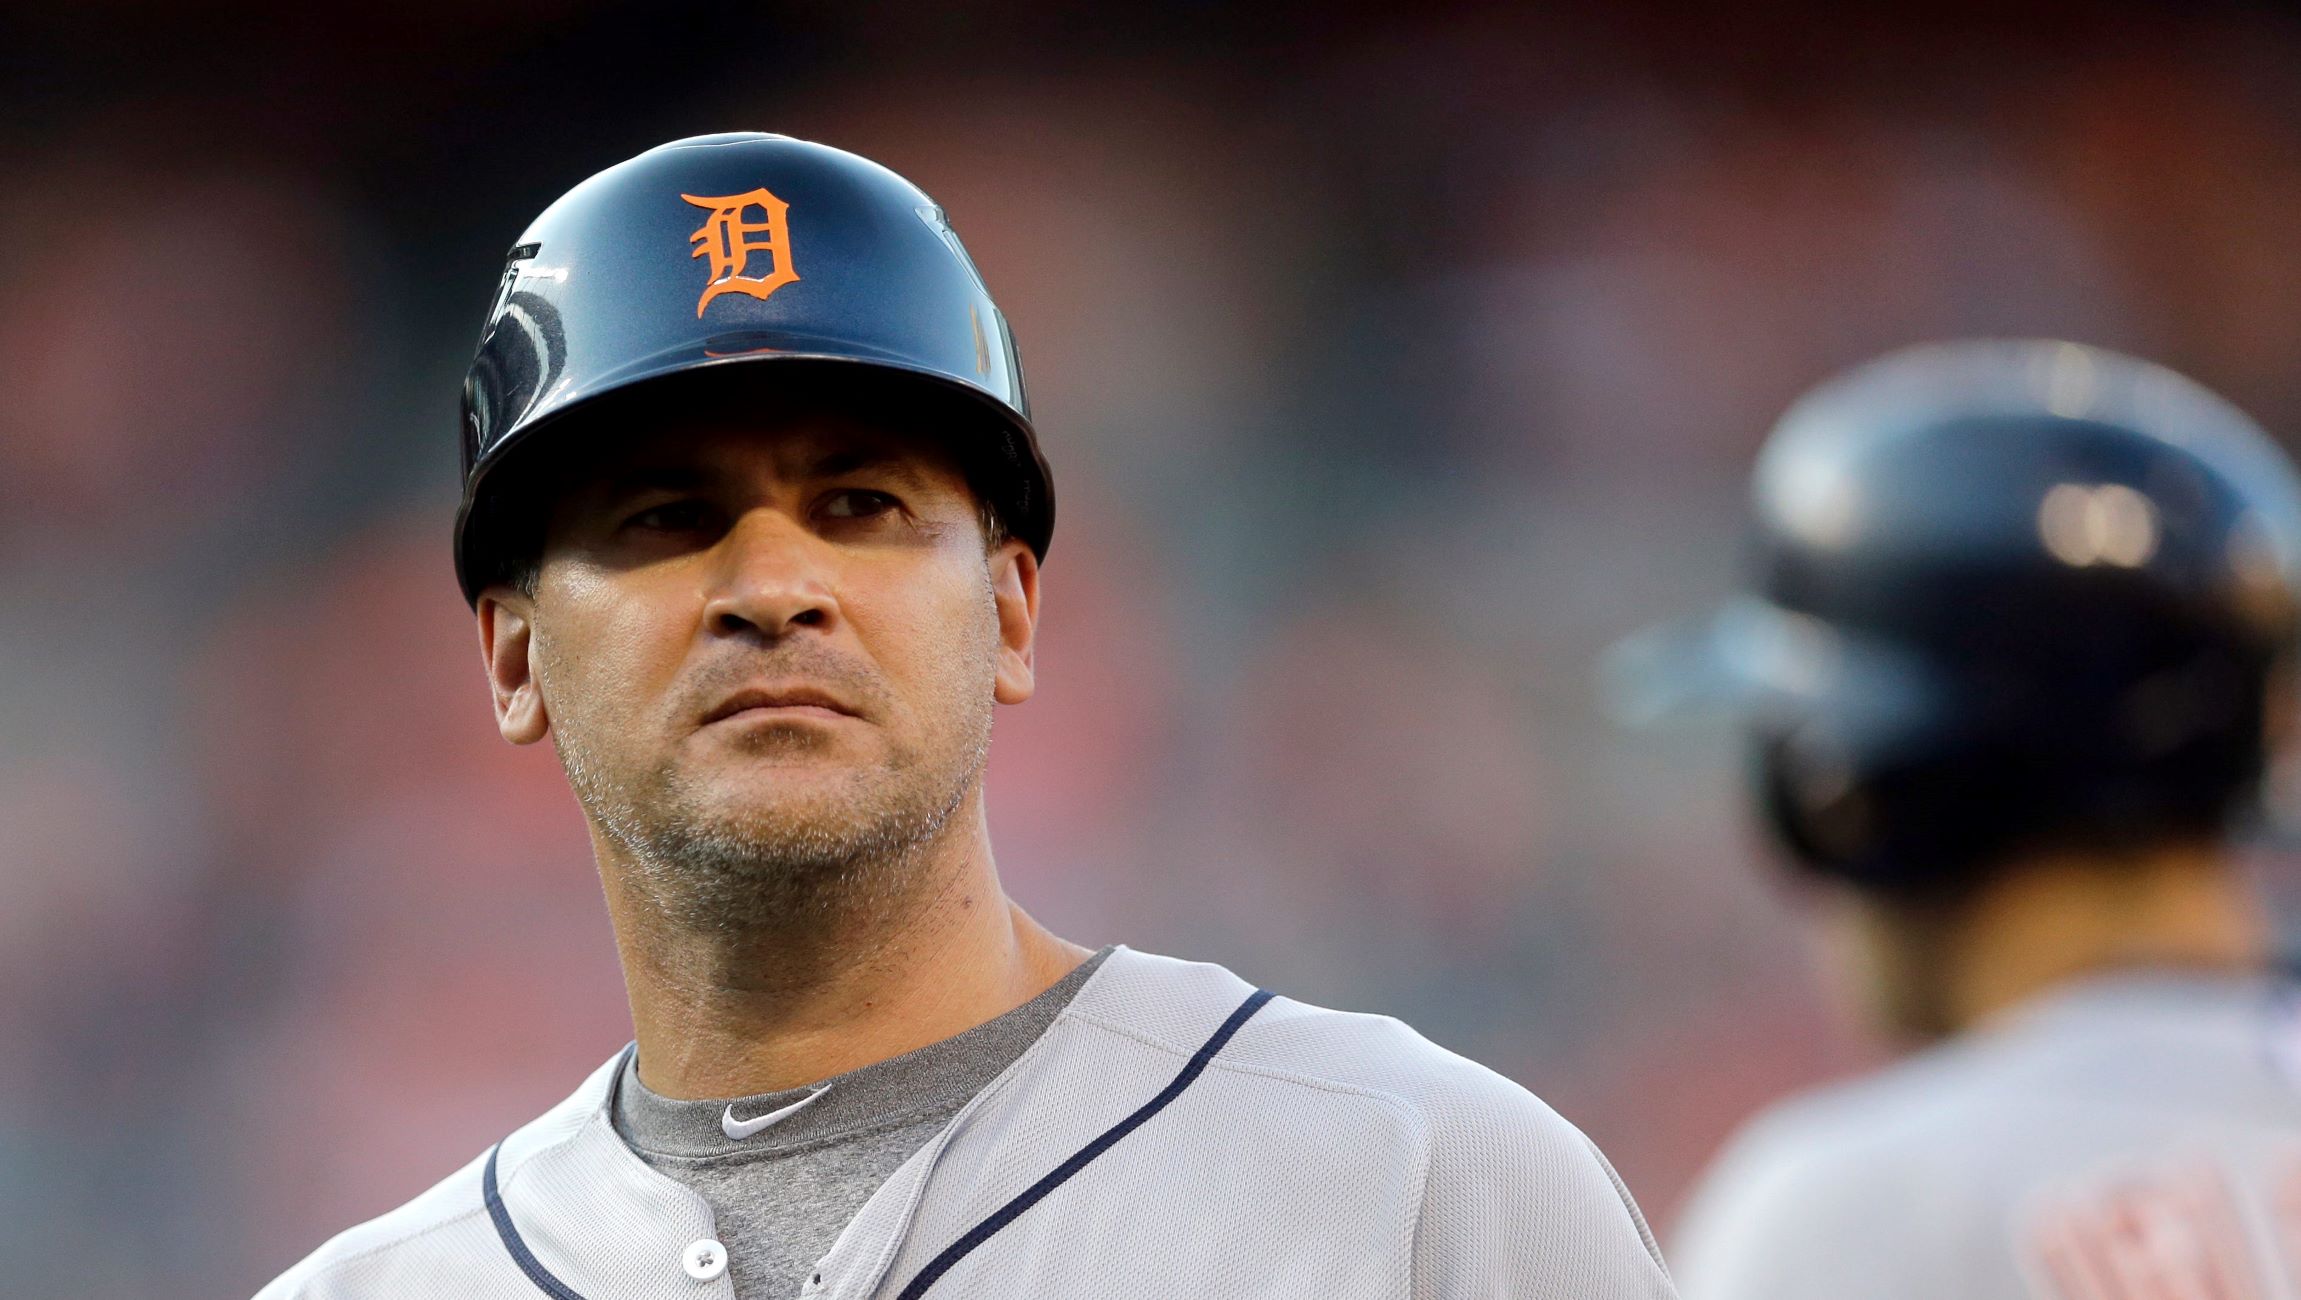 21-mind-blowing-facts-about-omar-vizquel